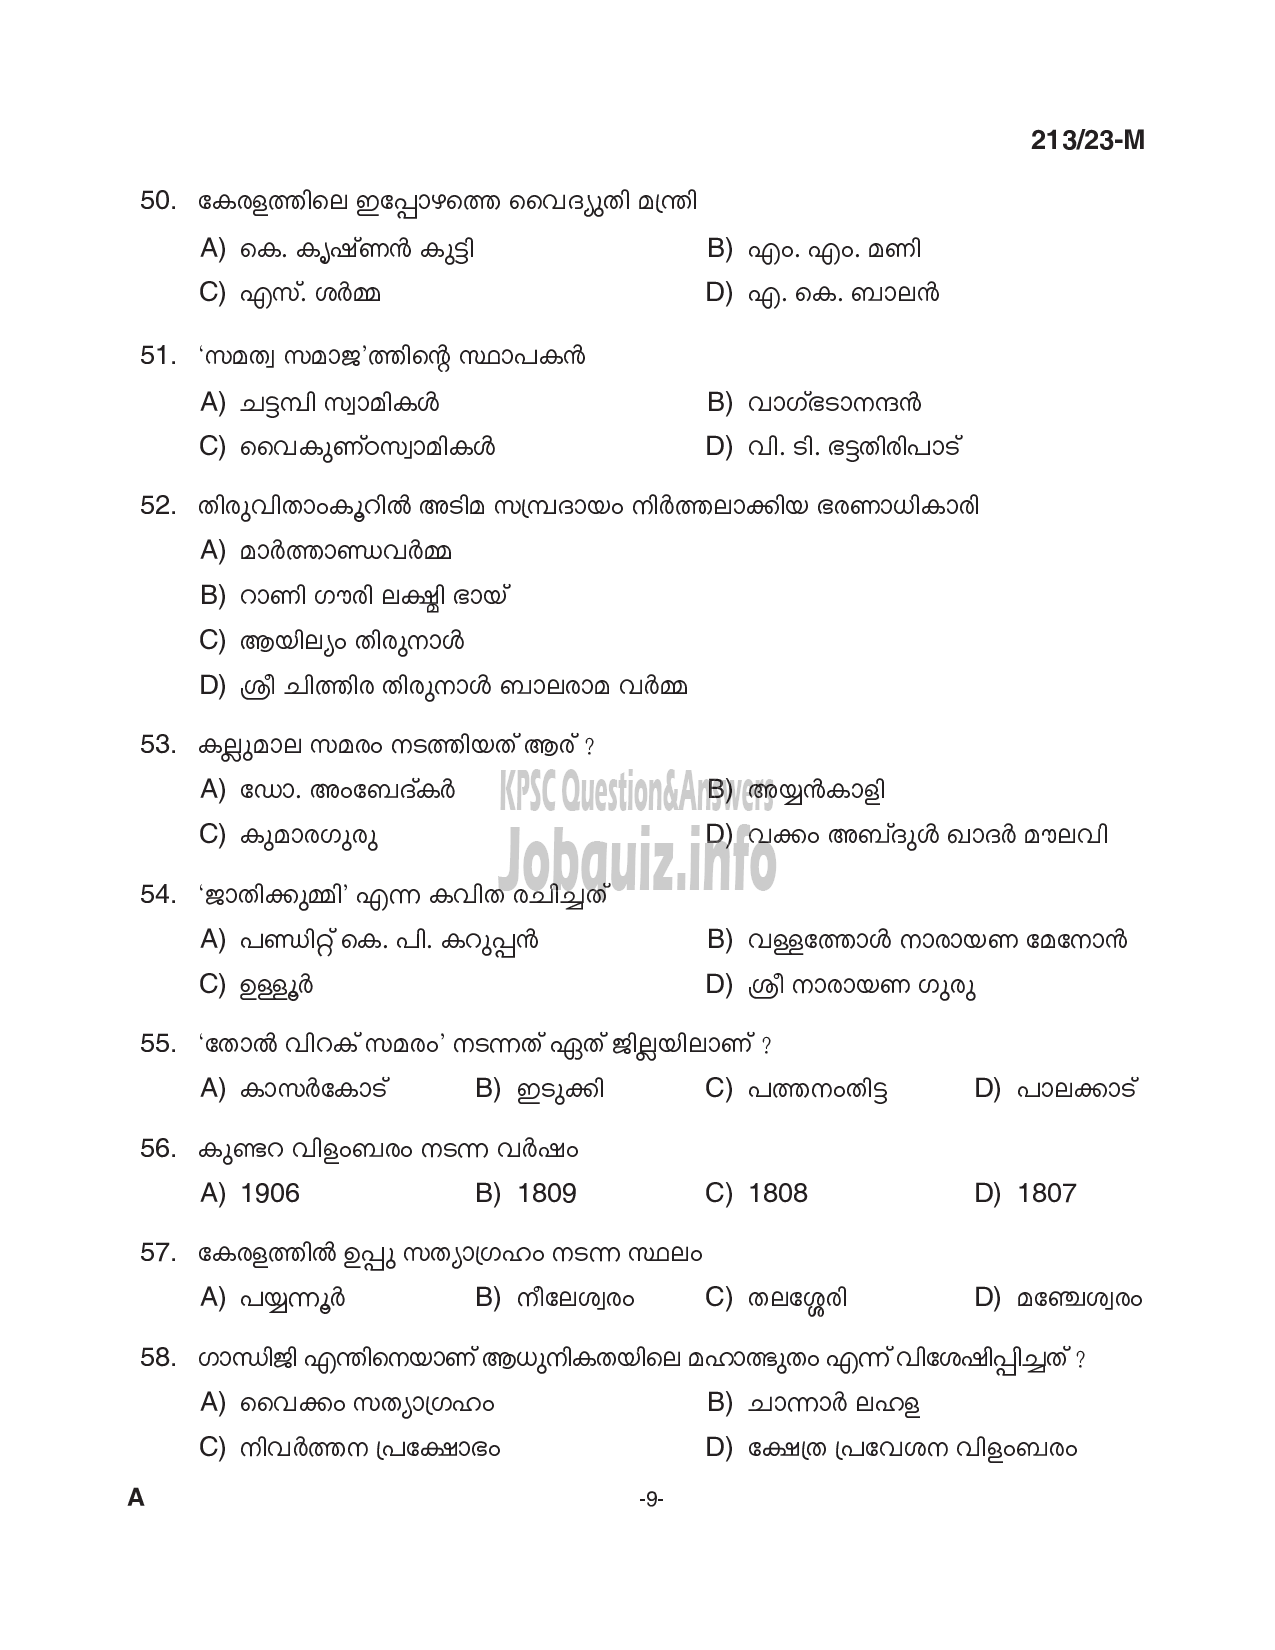 Kerala PSC Question Paper - Cooly Worker, LGS, Office Attendant Gr II/ Messenger/ Night Watchman, Farm Worker, Ambulance Assistant (Preliminary Examination Stage V) -9